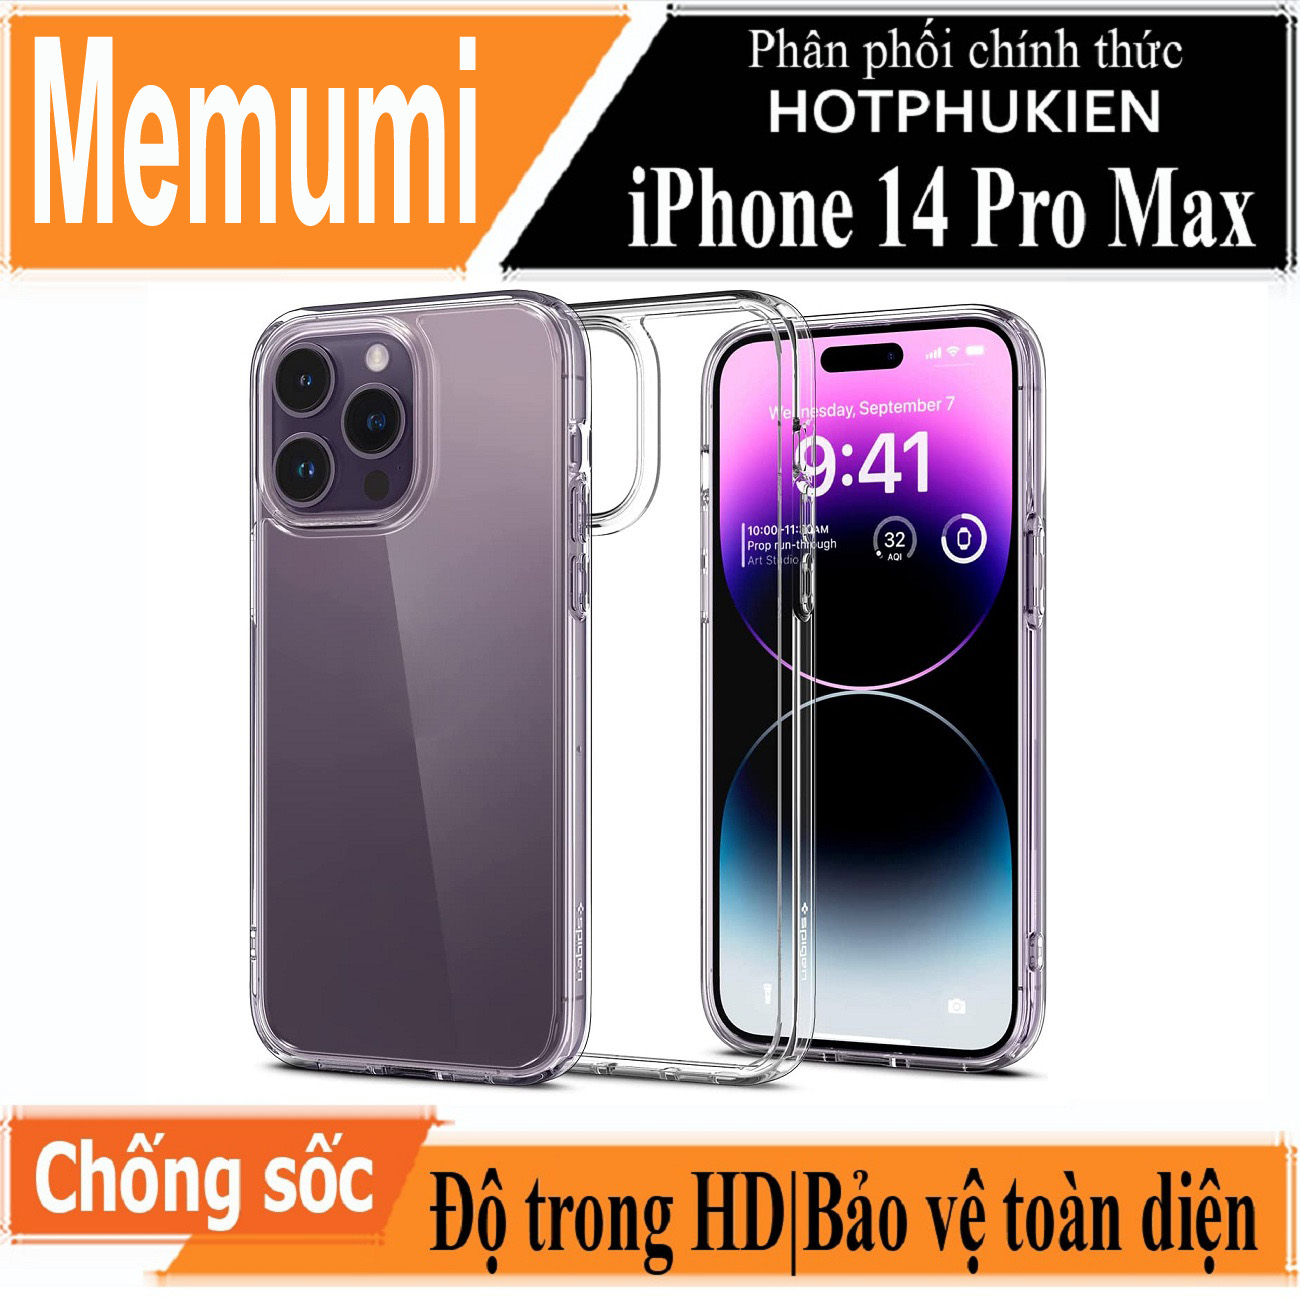 Ốp lưng trong suốt cho iPhone 14 Pro Max (6.7 inch) hiệu Memumi Crystal Clear Case